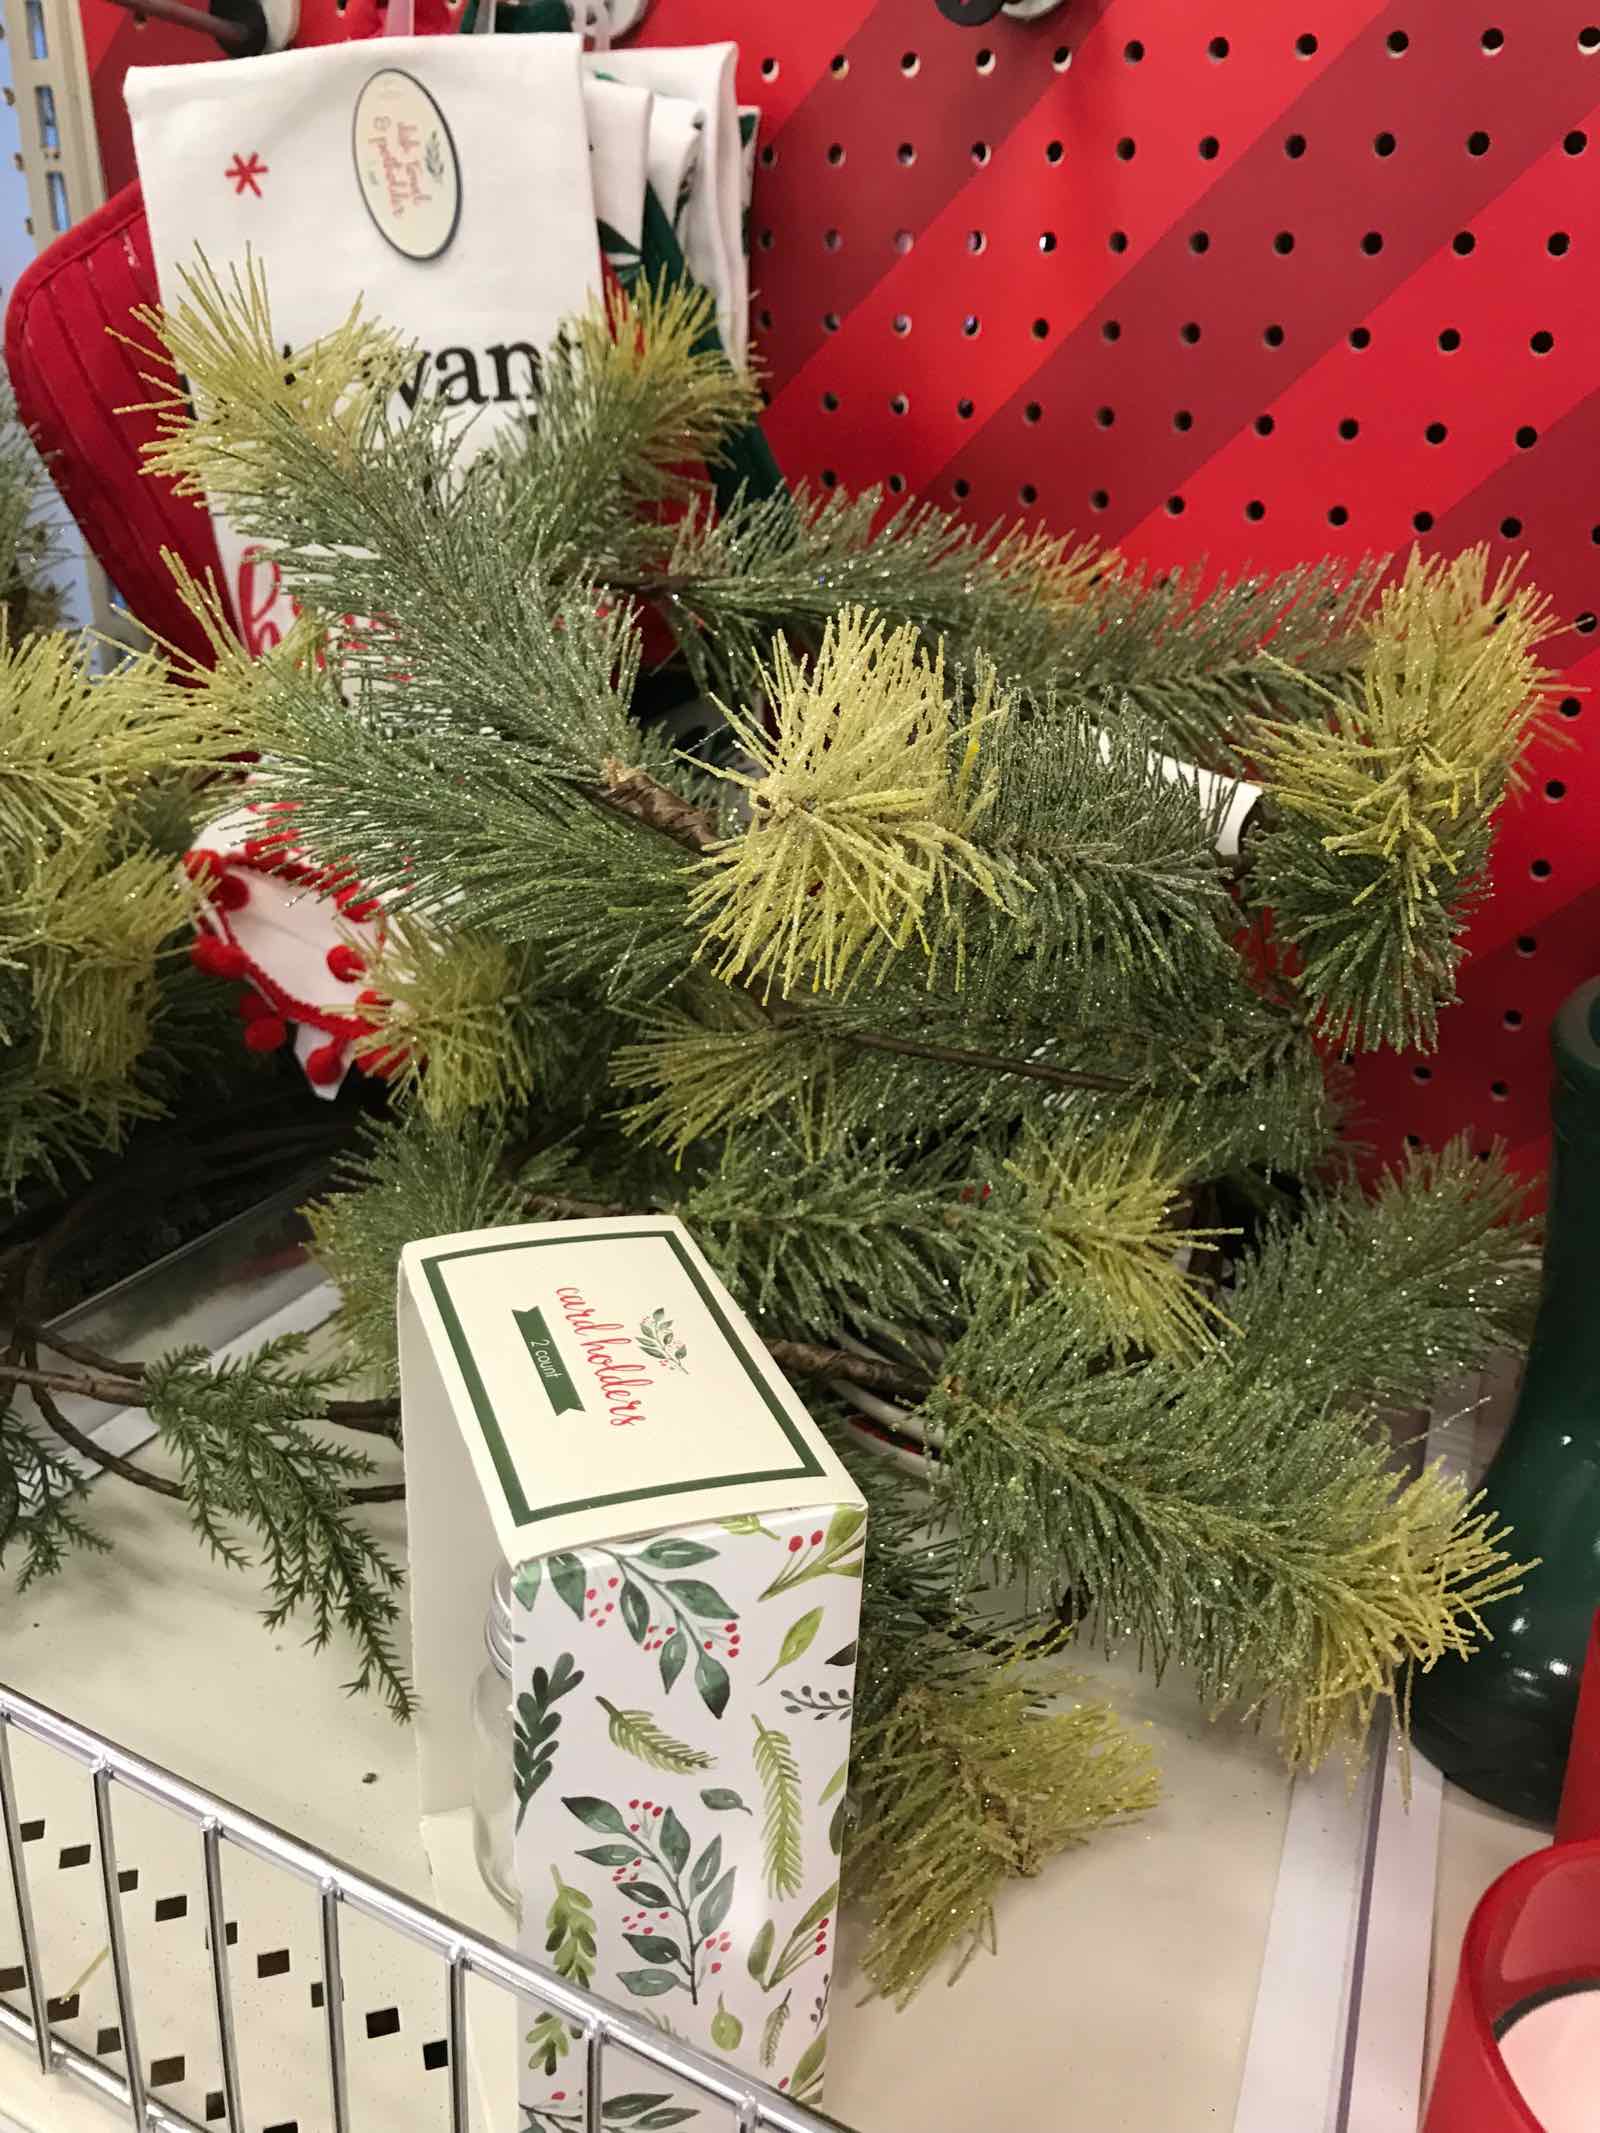 This blogger takes photos in the Target Dollar Spot - kinda want everything!